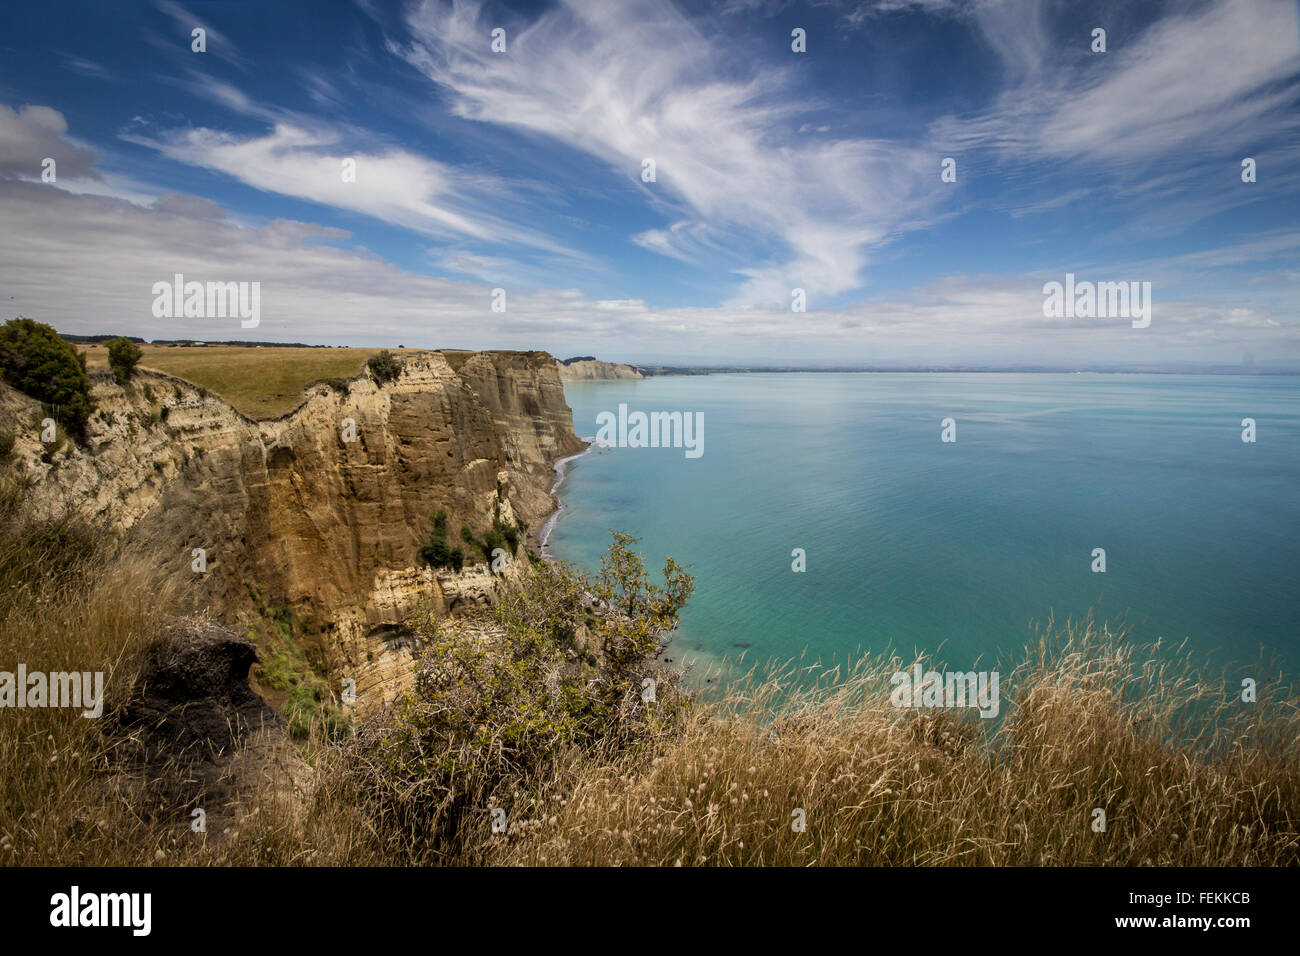 Cliffs of Cape Kidnappers Stock Photo